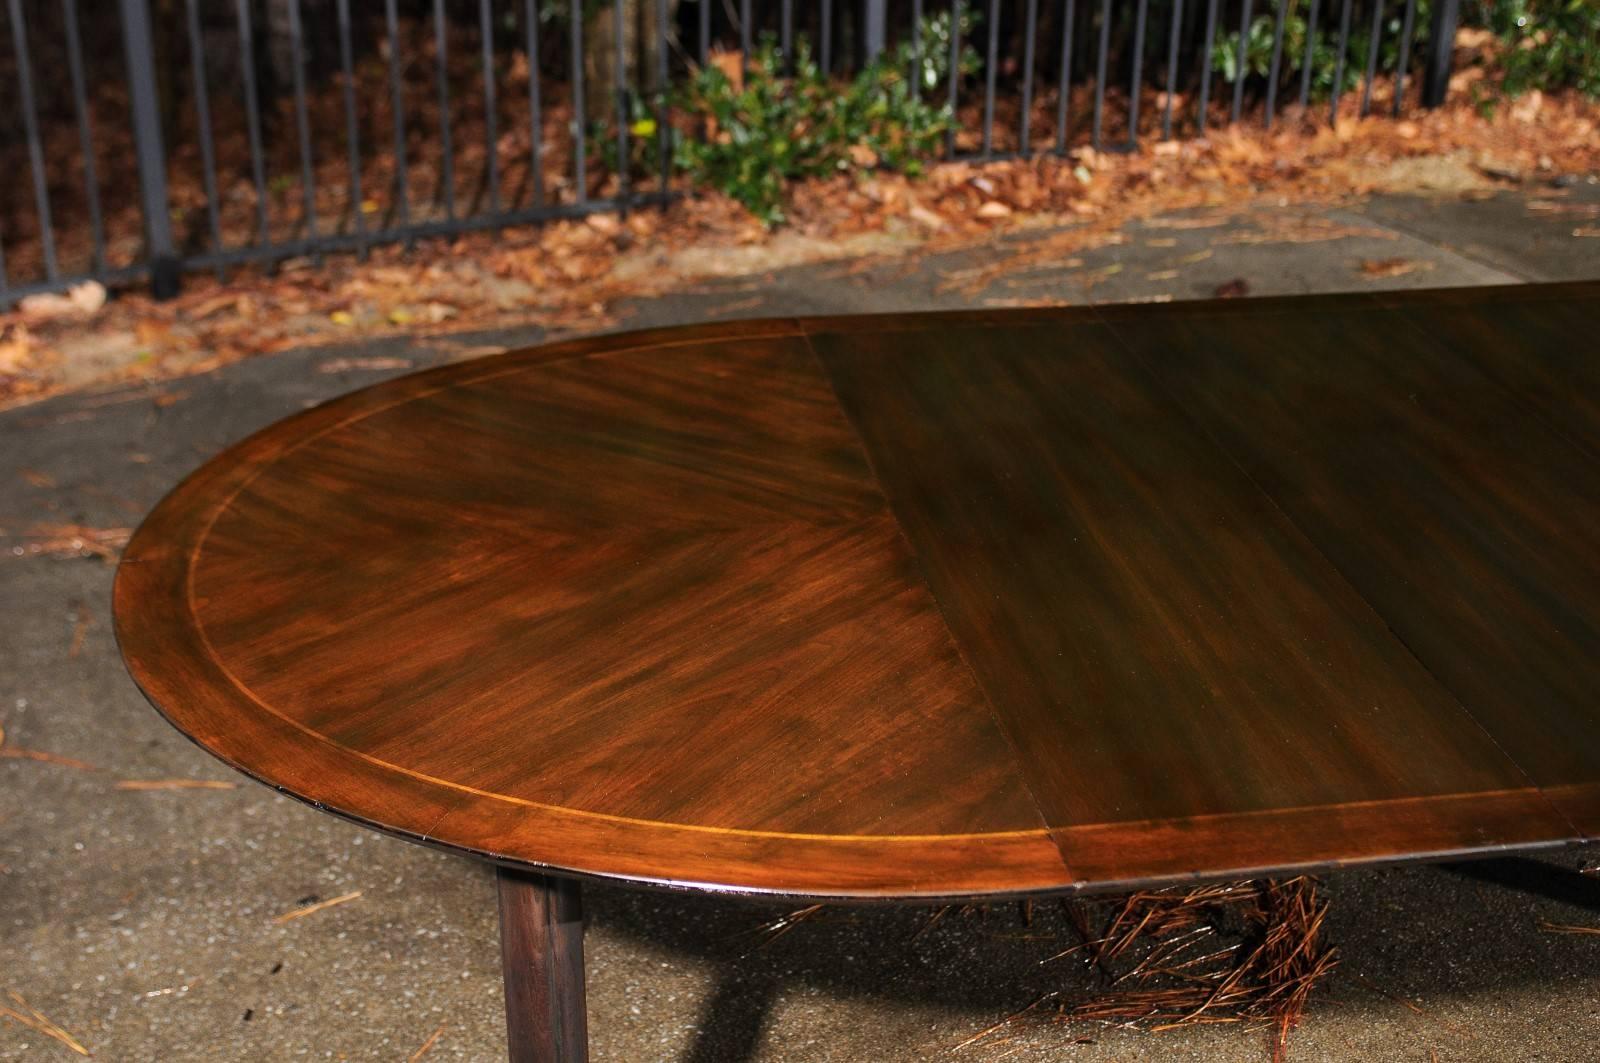 American Majestic Elliptical Walnut Dining Table by Michael Taylor for Baker, circa 1958 For Sale